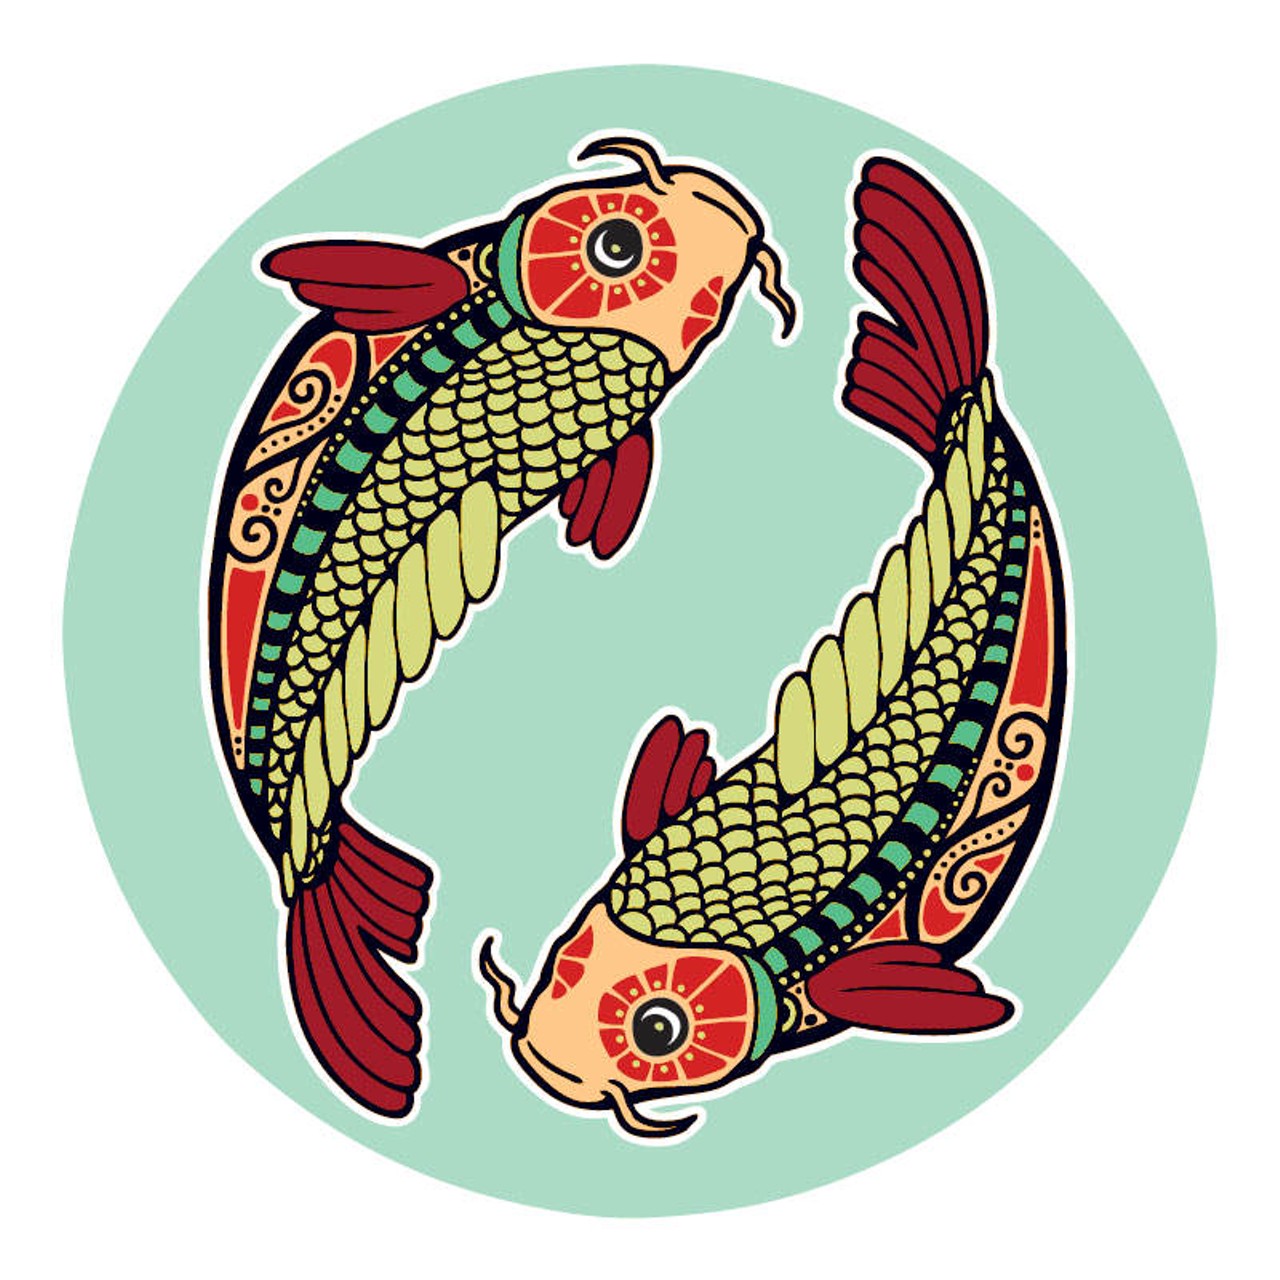 PISCES (Feb. 21-March 20): You have invested way too much, or put all of your energy into something that may not pan out. There are moments when you wonder what made you think that there was really anything to this, and you are going through a process that is a lot like what happens when the truth hits us square in the face. As much as it&#146;s difficult to avoid looking at it, there&#146;s no way you can fail to see that yes indeed, you put all your eggs in a basket that was woven out of things that weren&#146;t real enough to withstand the elements, or the winds of change that alter time and circumstance.